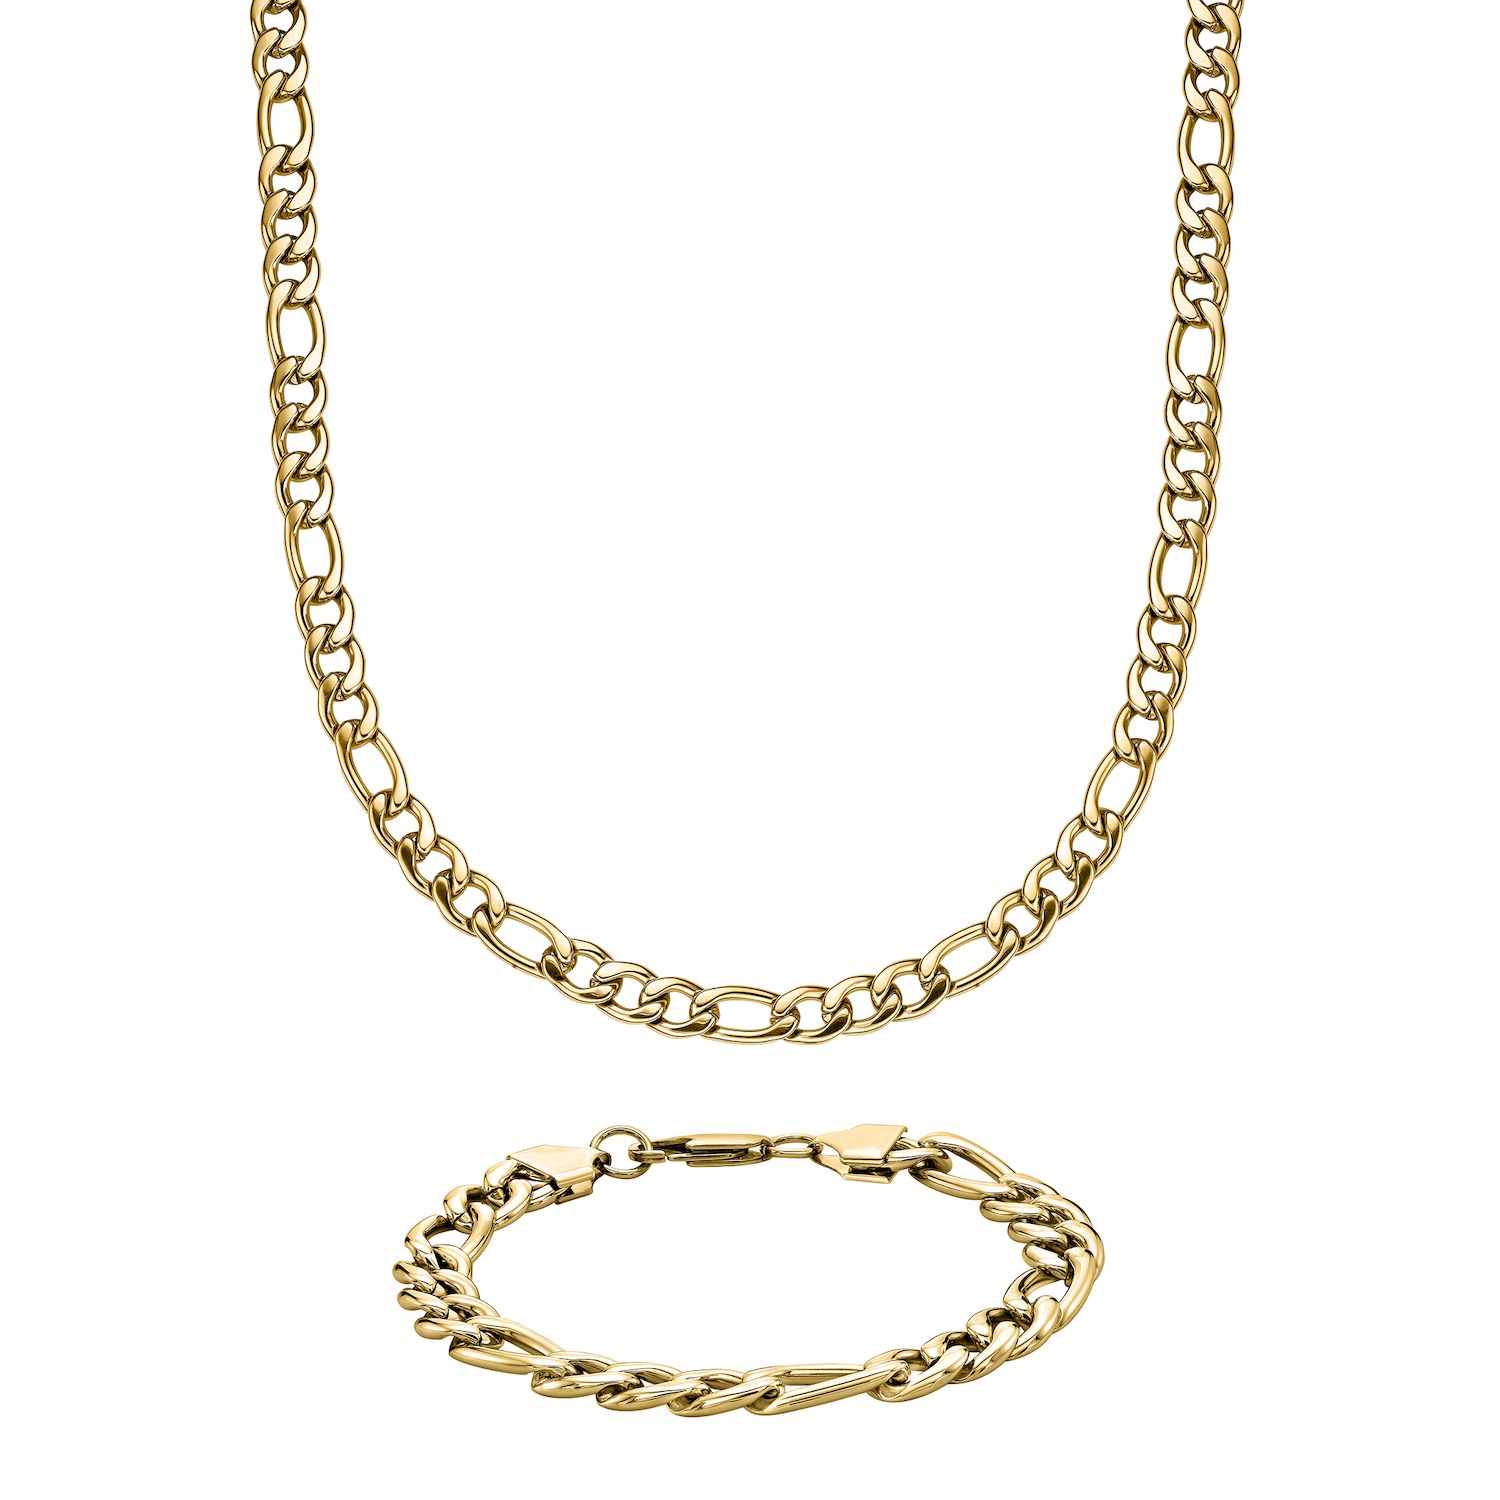 Steel Nation Gold Tone Ion-Plated Stainless Steel Franco Chain Necklace